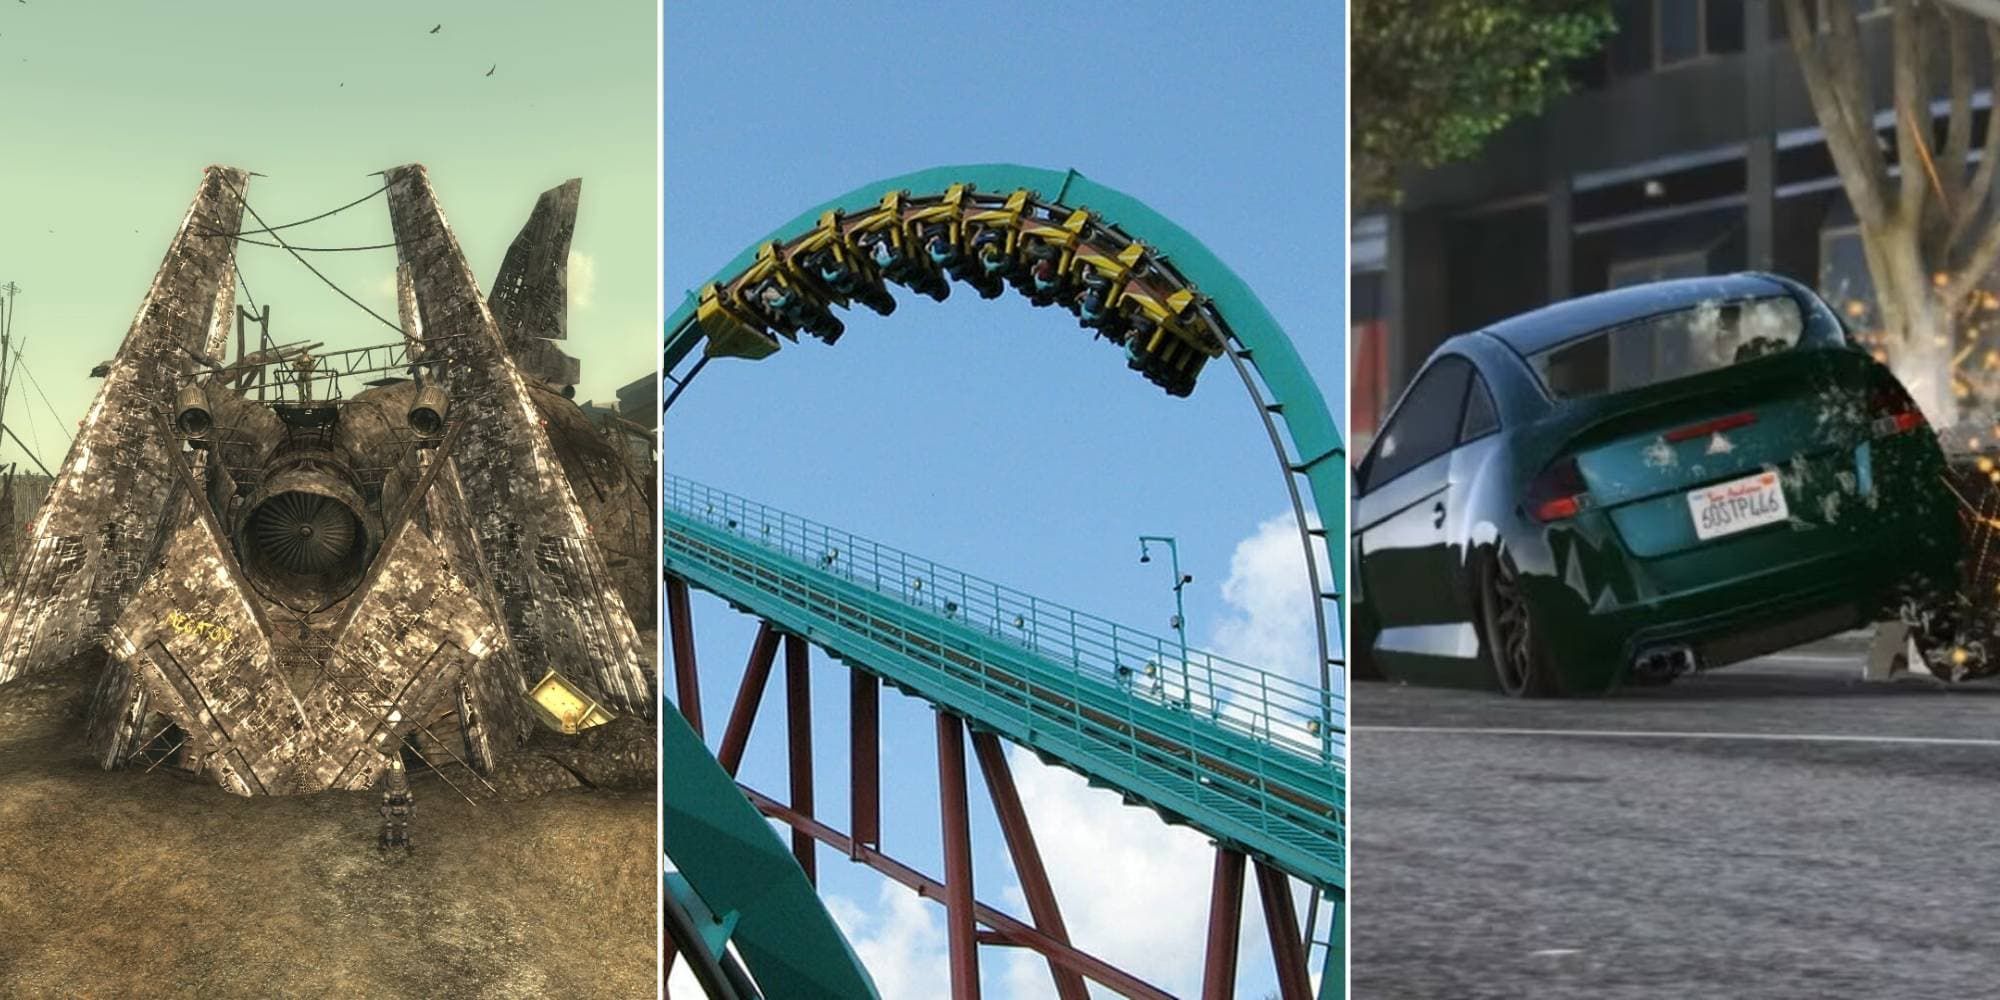 The settlement of Megaton in Fallout 3, a coaster going through a loop in RollerCoaster Tycoon, and a car being crashed into in GTA 5.